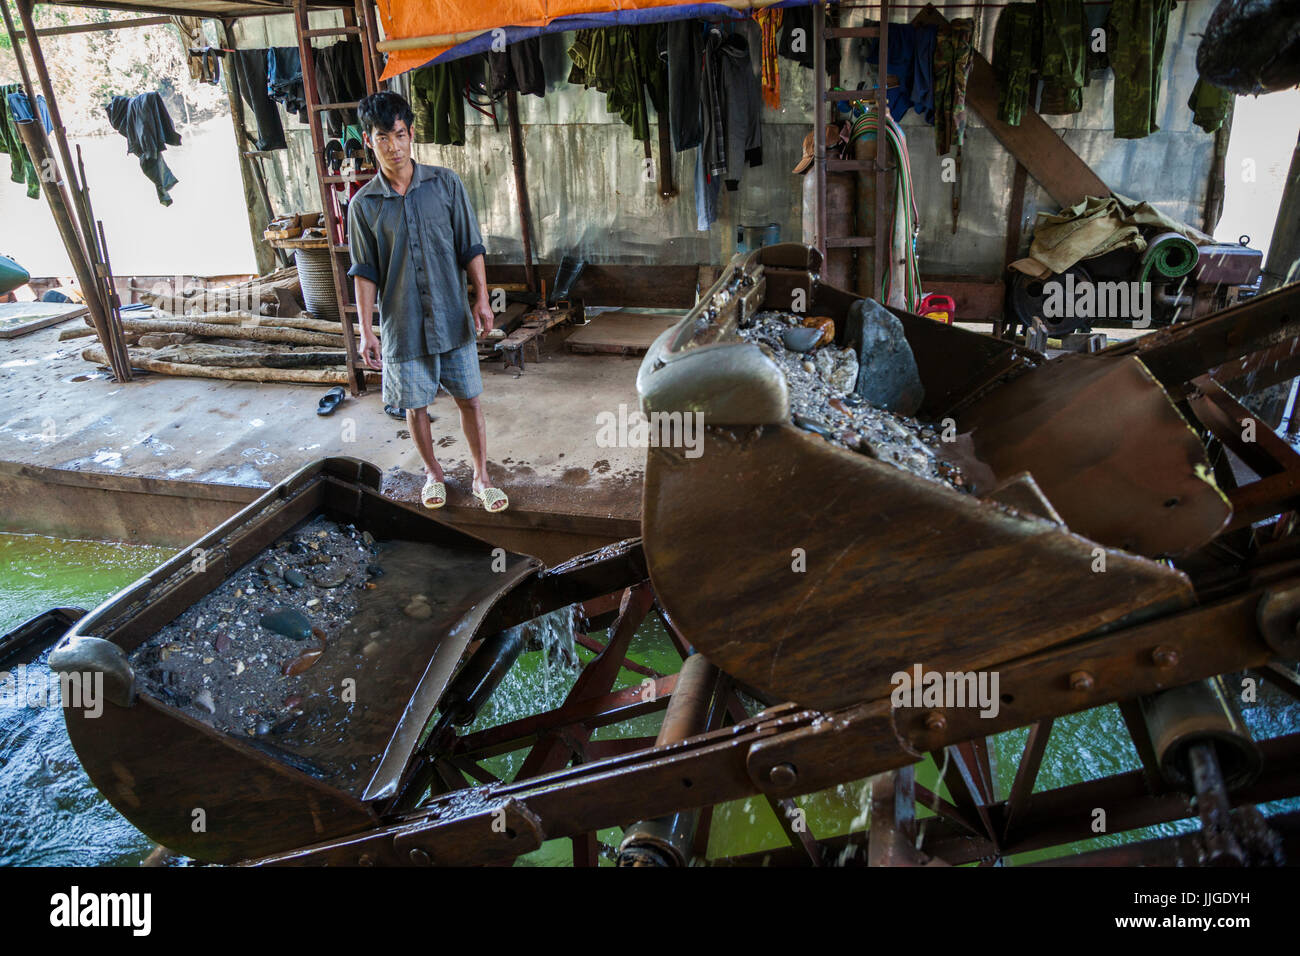 A Vietnamese man stands besides the steel buckets on an operating mechanical gold dredge floating on the Nam Ou River, Laos. Stock Photo